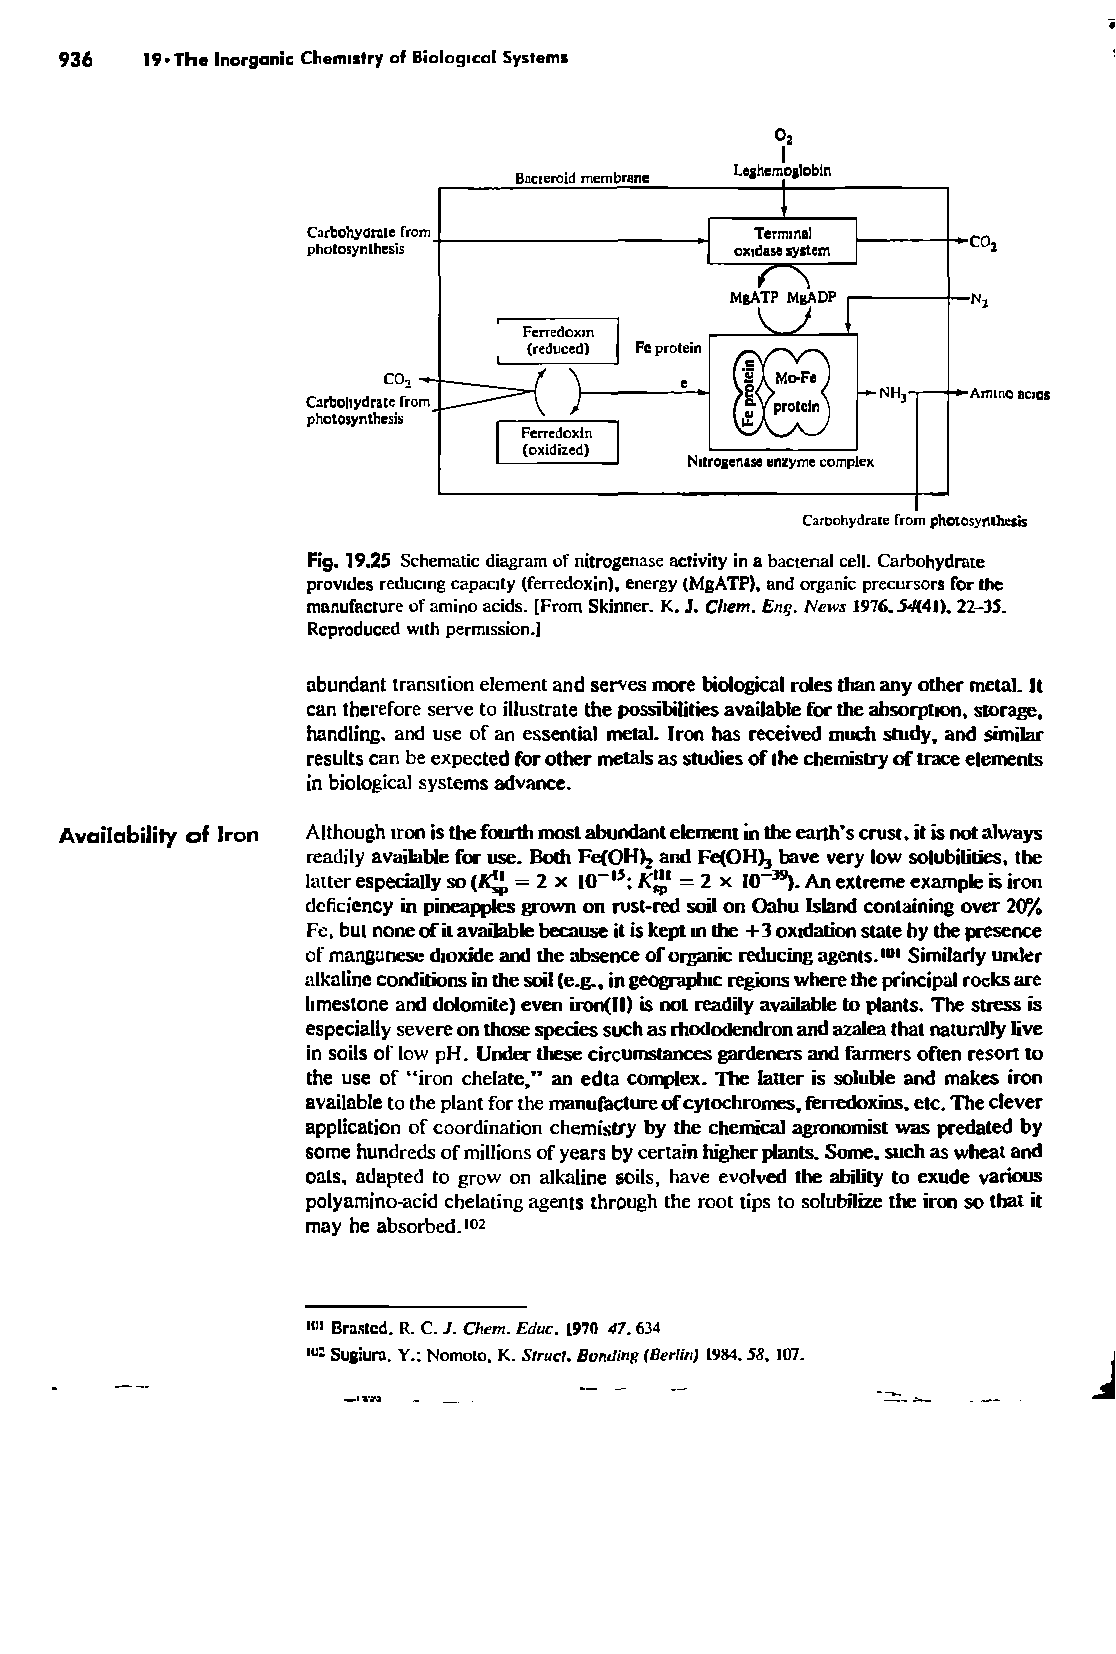 Fig. 19.25 Schematic diagram of nitrogenase activity in a bacterial cell. Carbohydrate provides reducing capacity (ferredoxin), energy (MgATP), and organic precursors for the manufacture of amino acids. [From Skinner. K. J. Chem. Eng. News 1976.54(41). 22-35. Reproduced with permission.]...